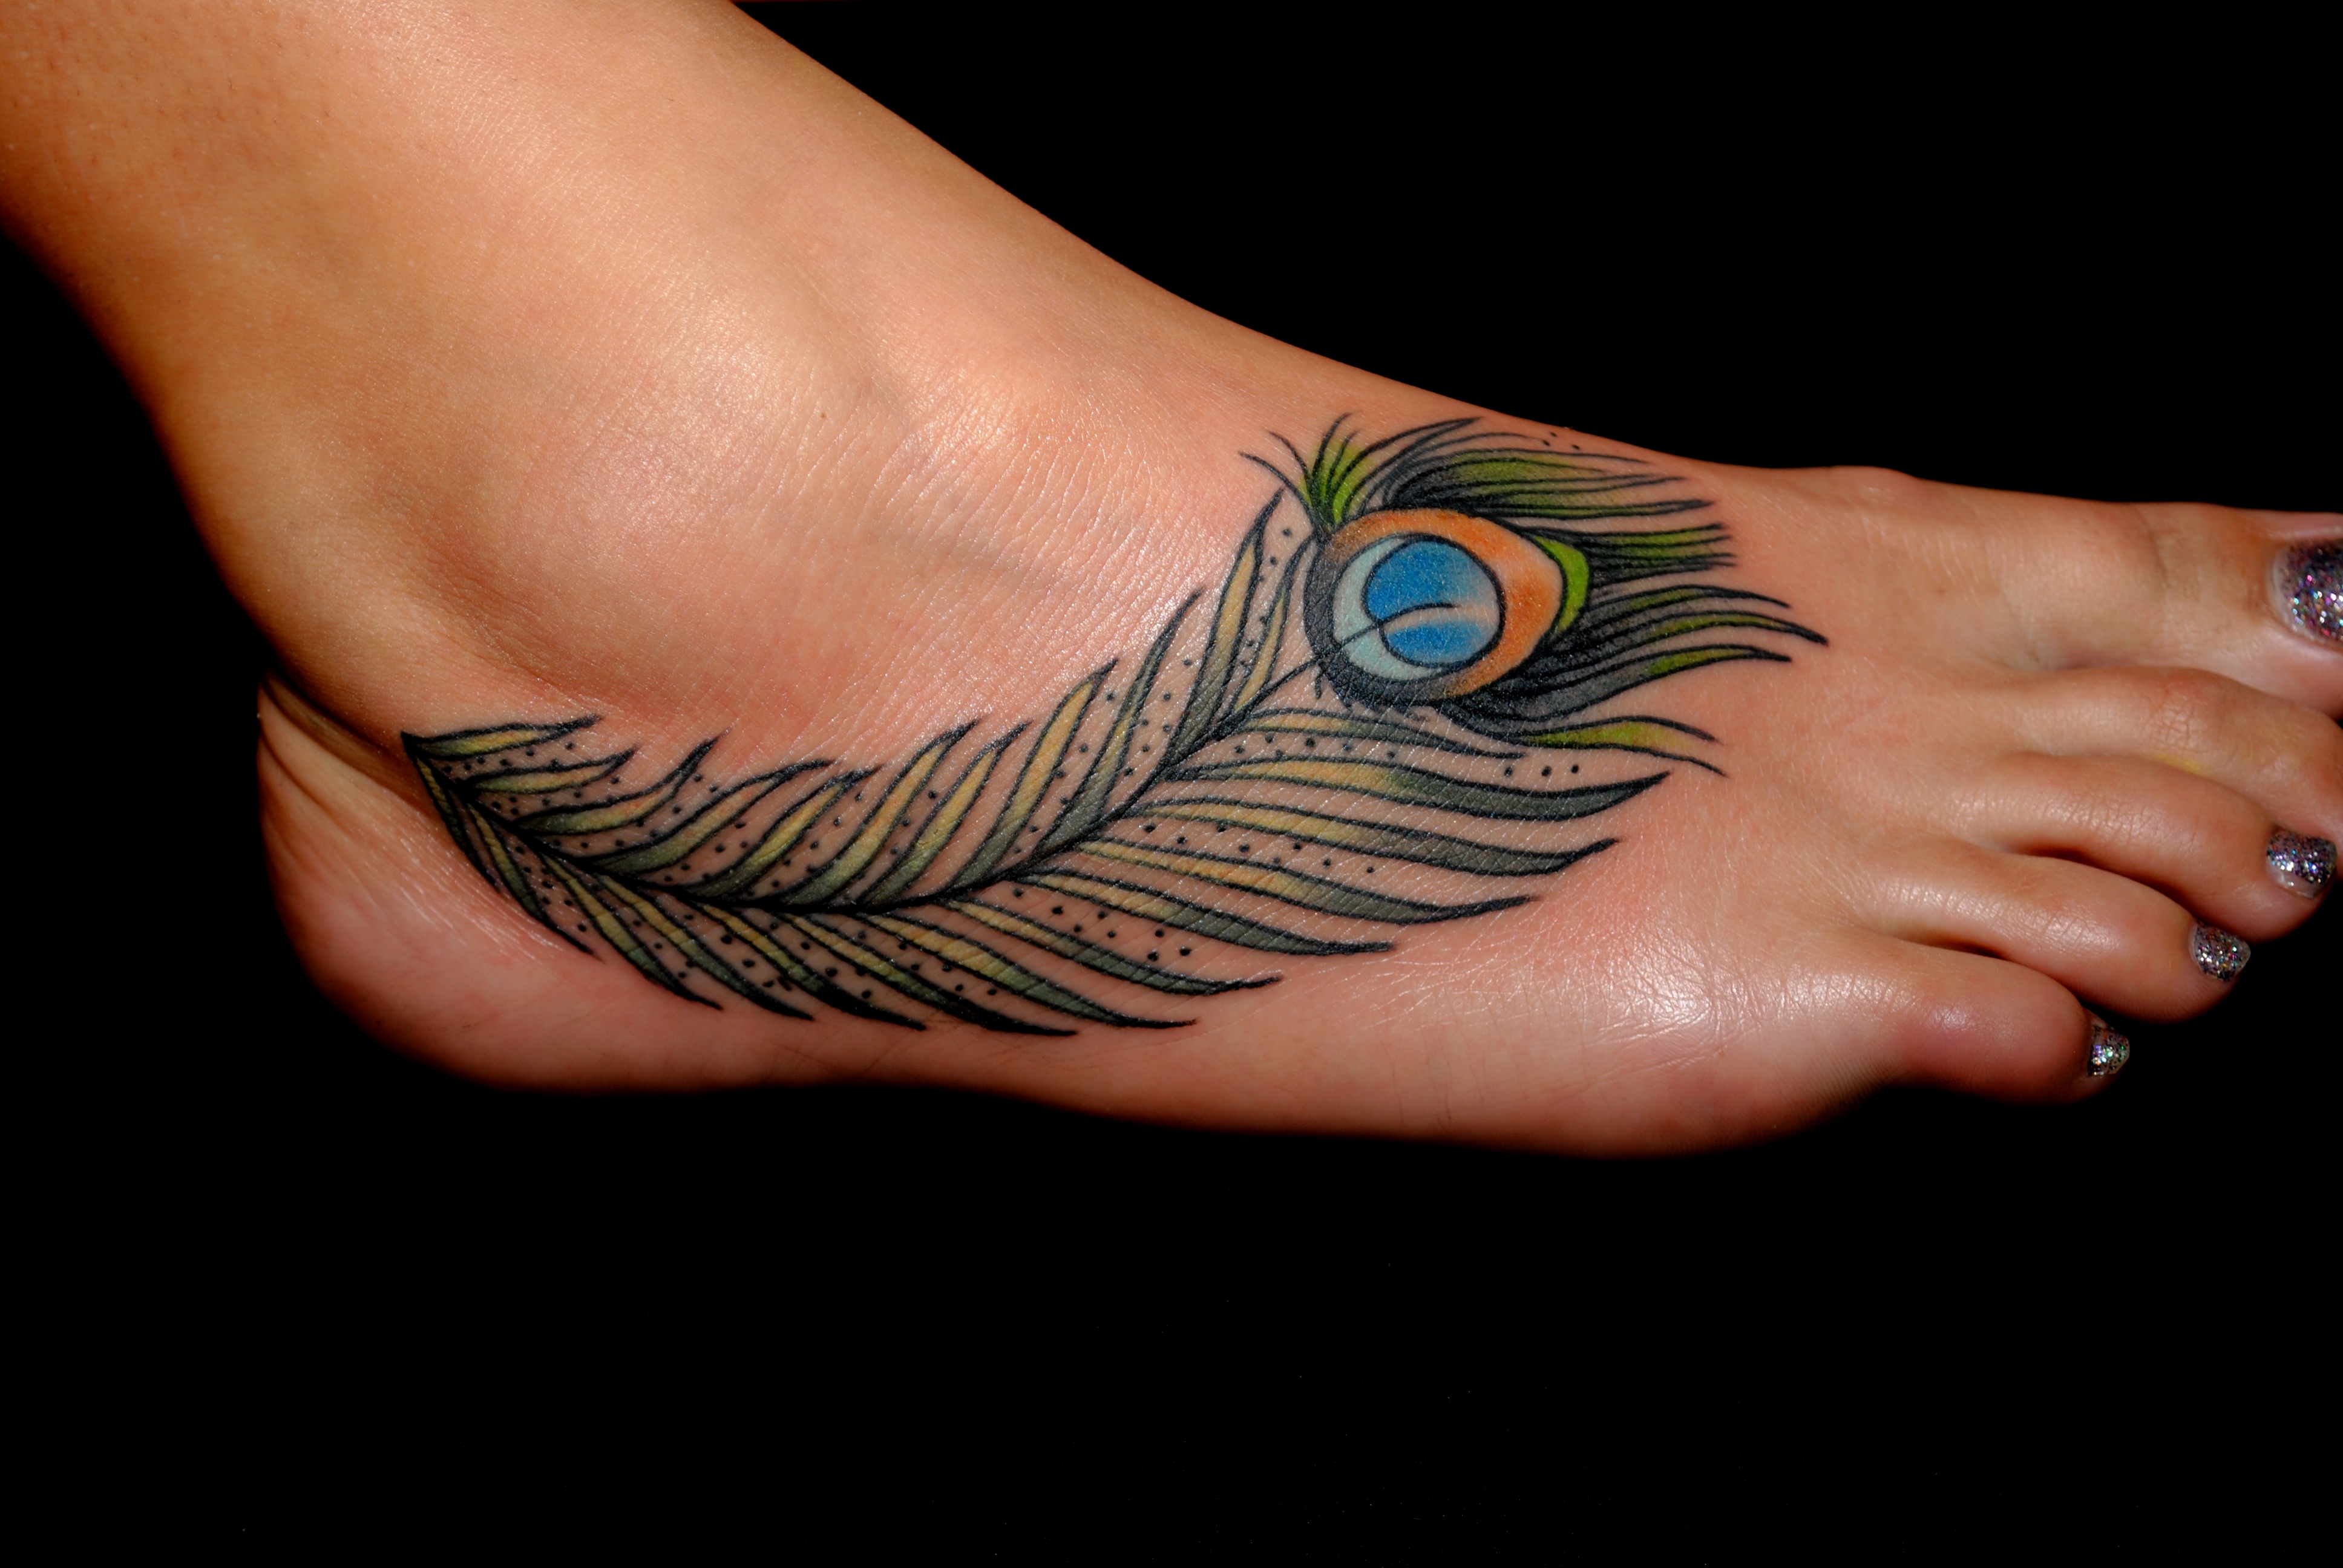 Peacock feather tattoo on leg on black background Desktop wallpapers  1920x1200